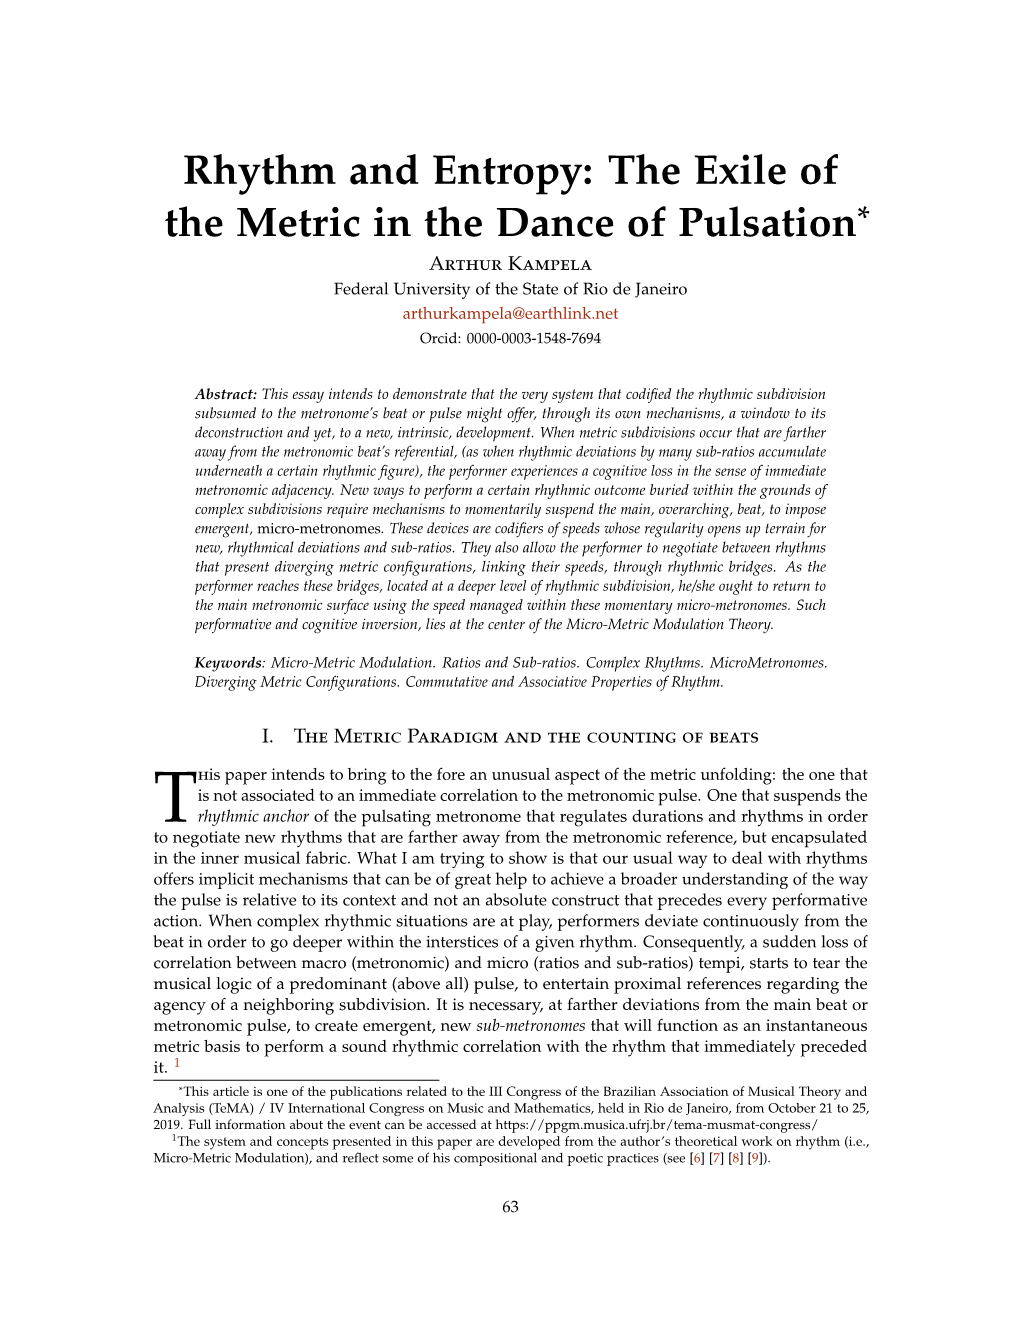 Rhythm and Entropy: the Exile of the Metric in the Dance of Pulsation*